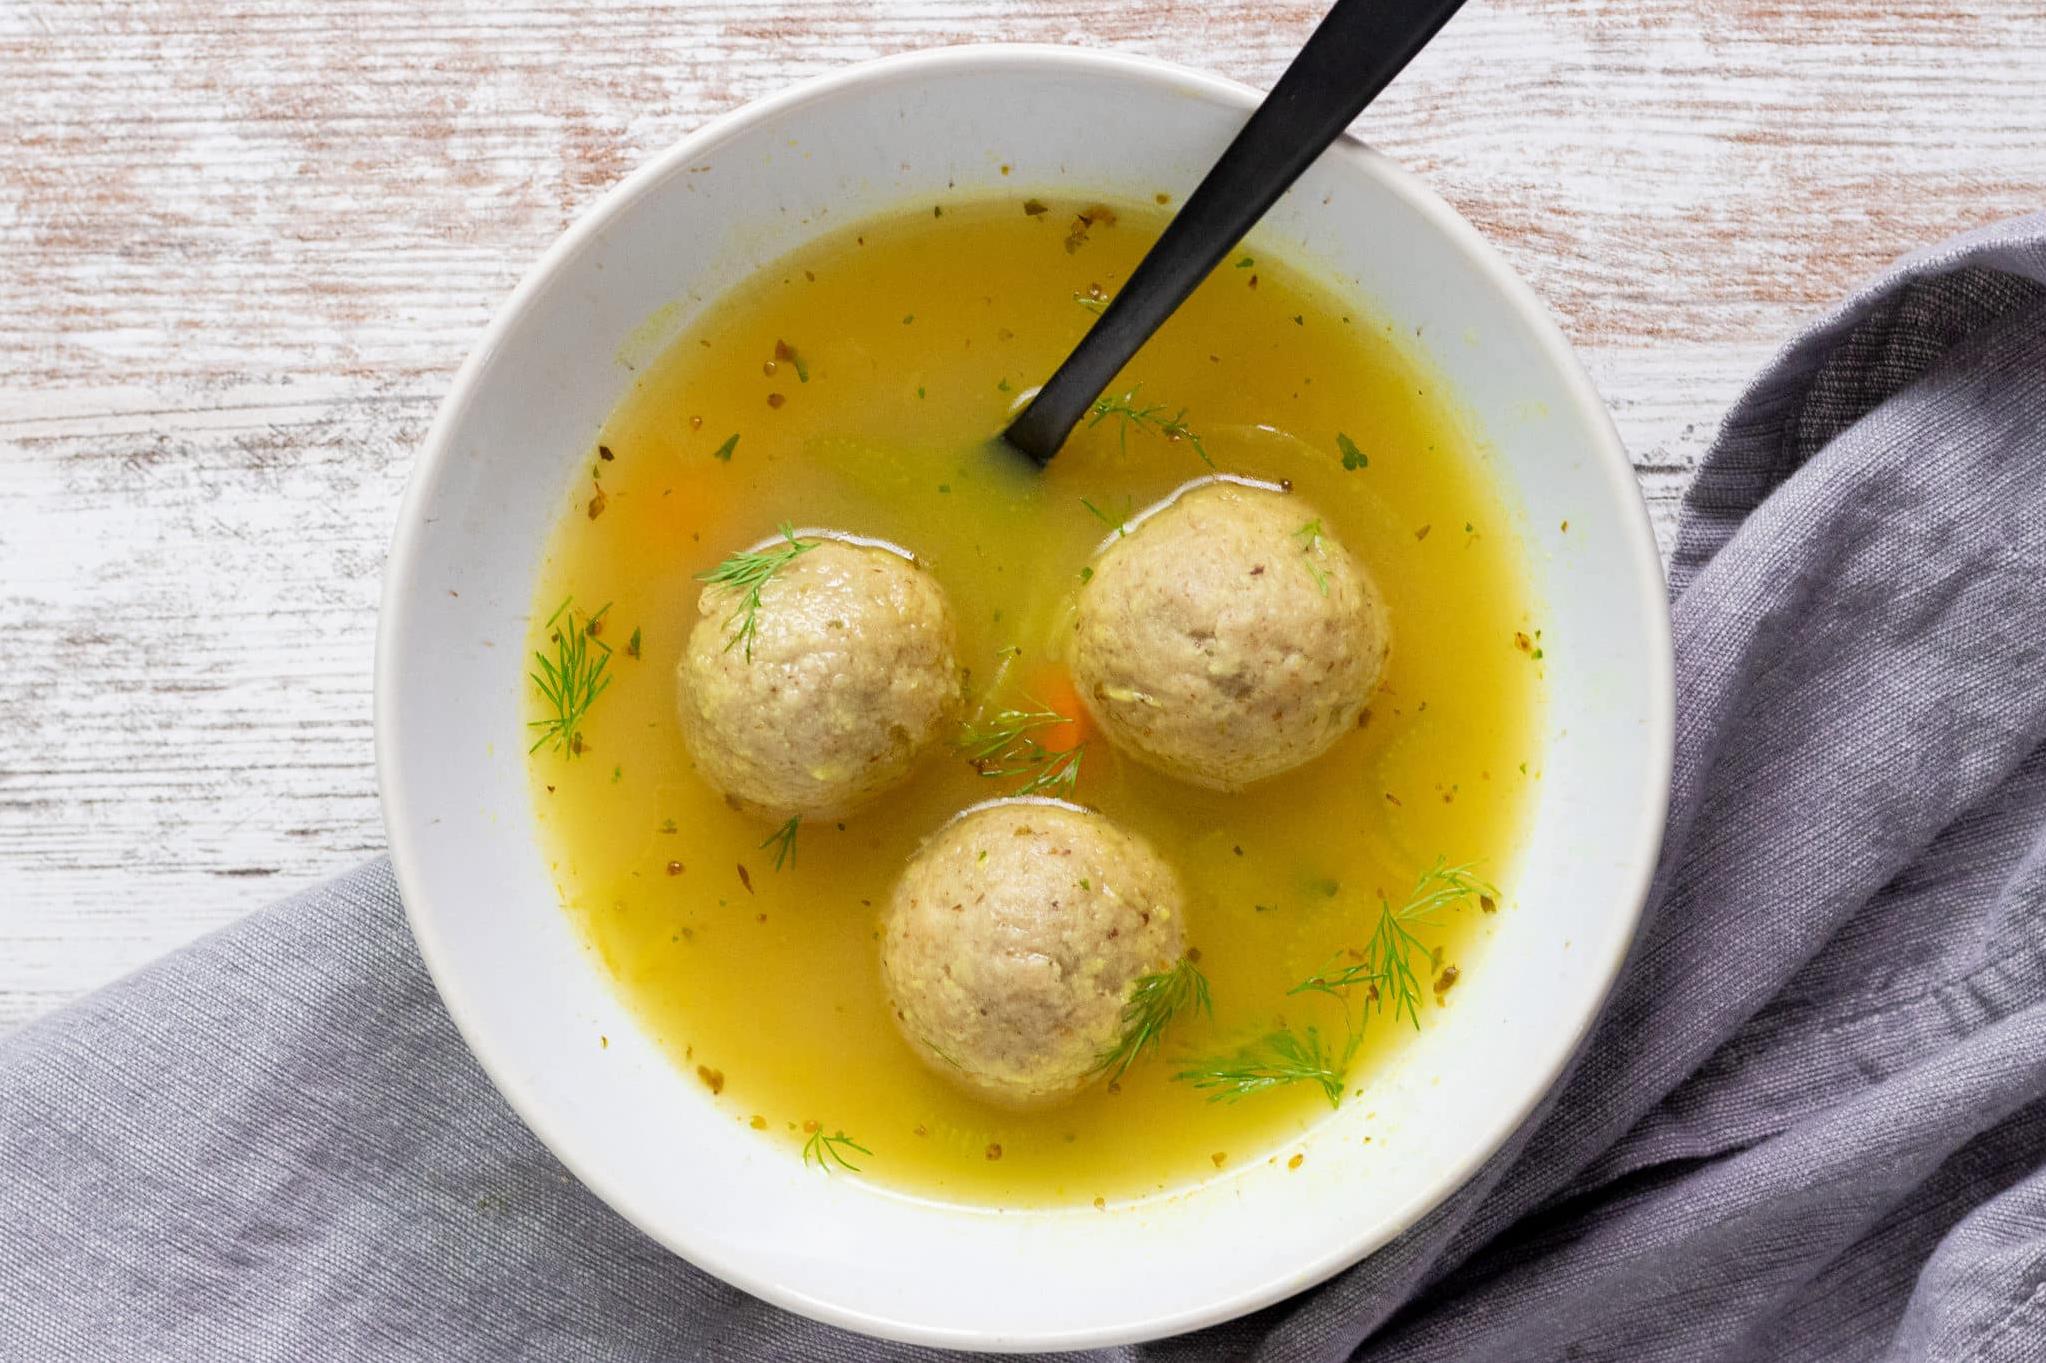  Light and fluffy matzo balls swimming in a sea of flavorful broth.